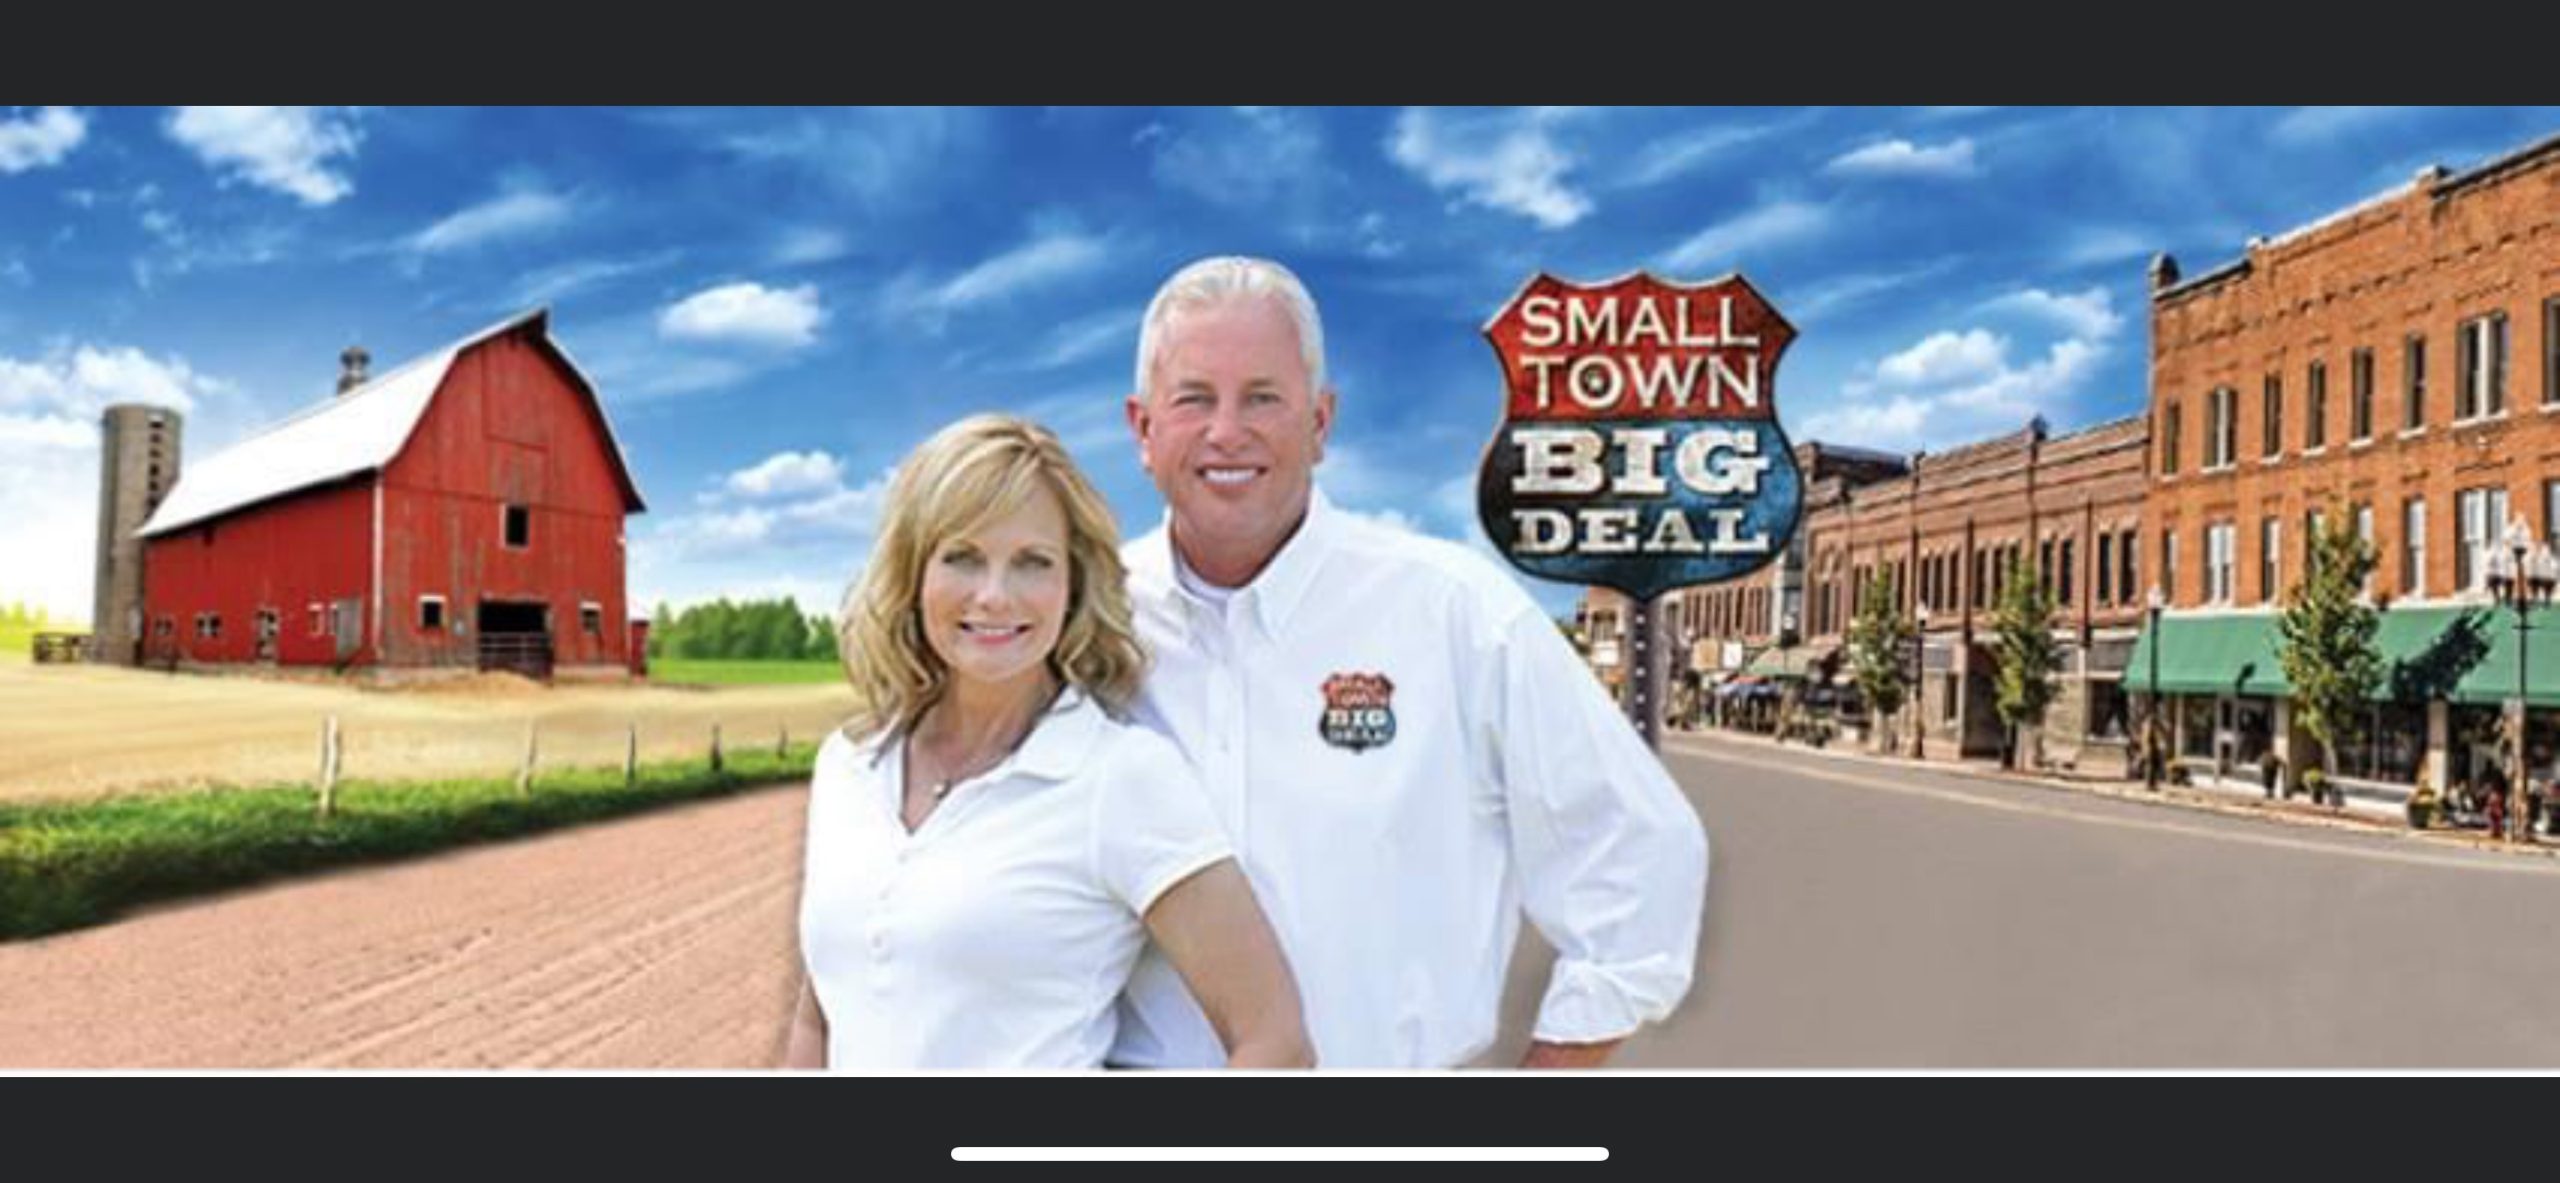 “Small Town, Big Deal” Films Episode in Greenville, IL:  The DeMoulin Museum